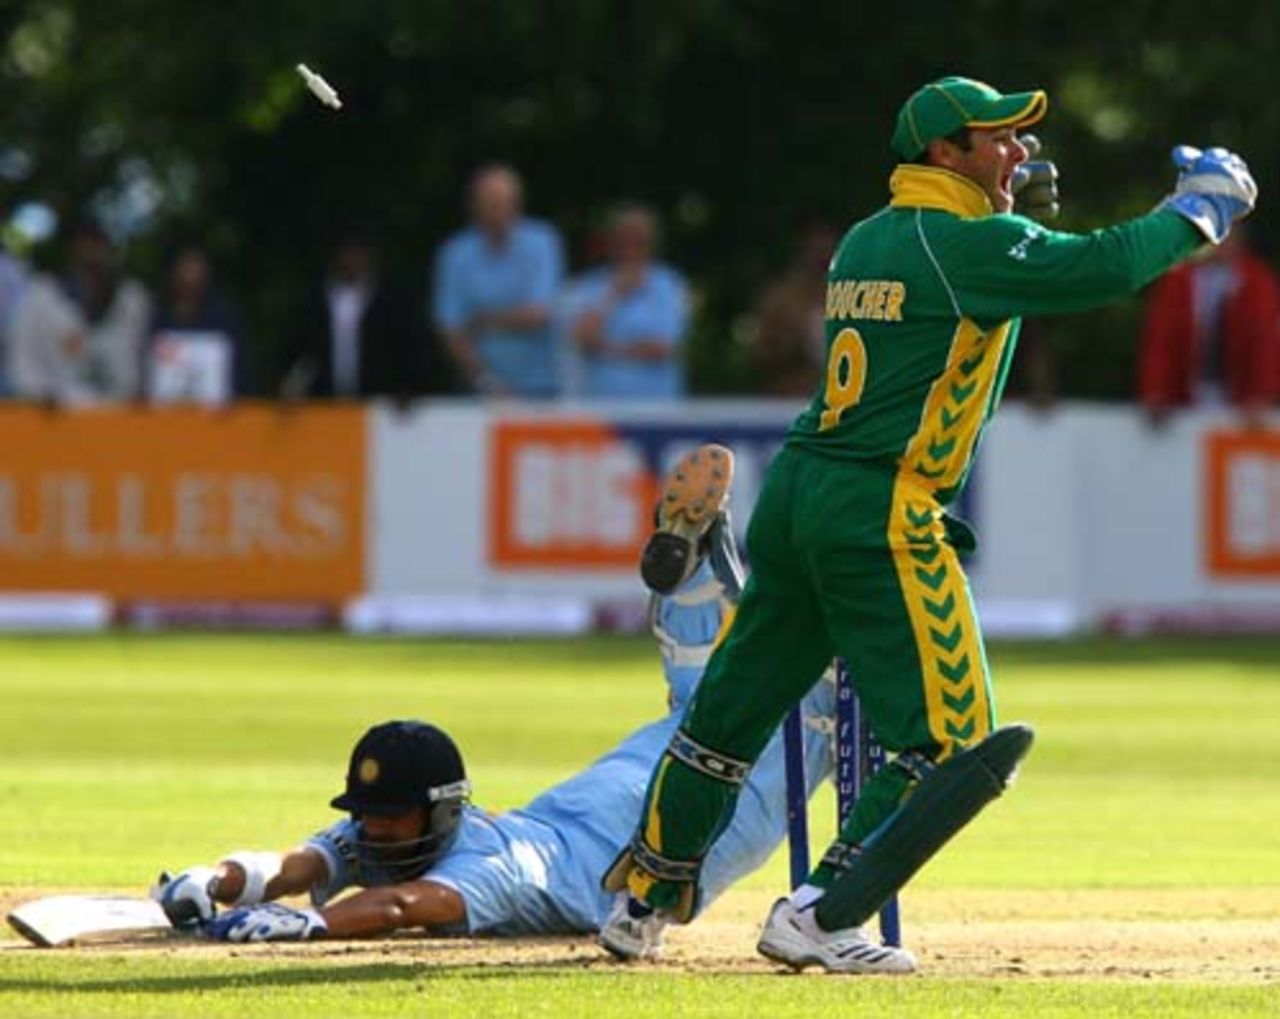 Gautam Gambhir just about makes his ground as Mark Boucher whips the bails, India v South Africa, 3rd ODI, Belfast, July 1, 2007